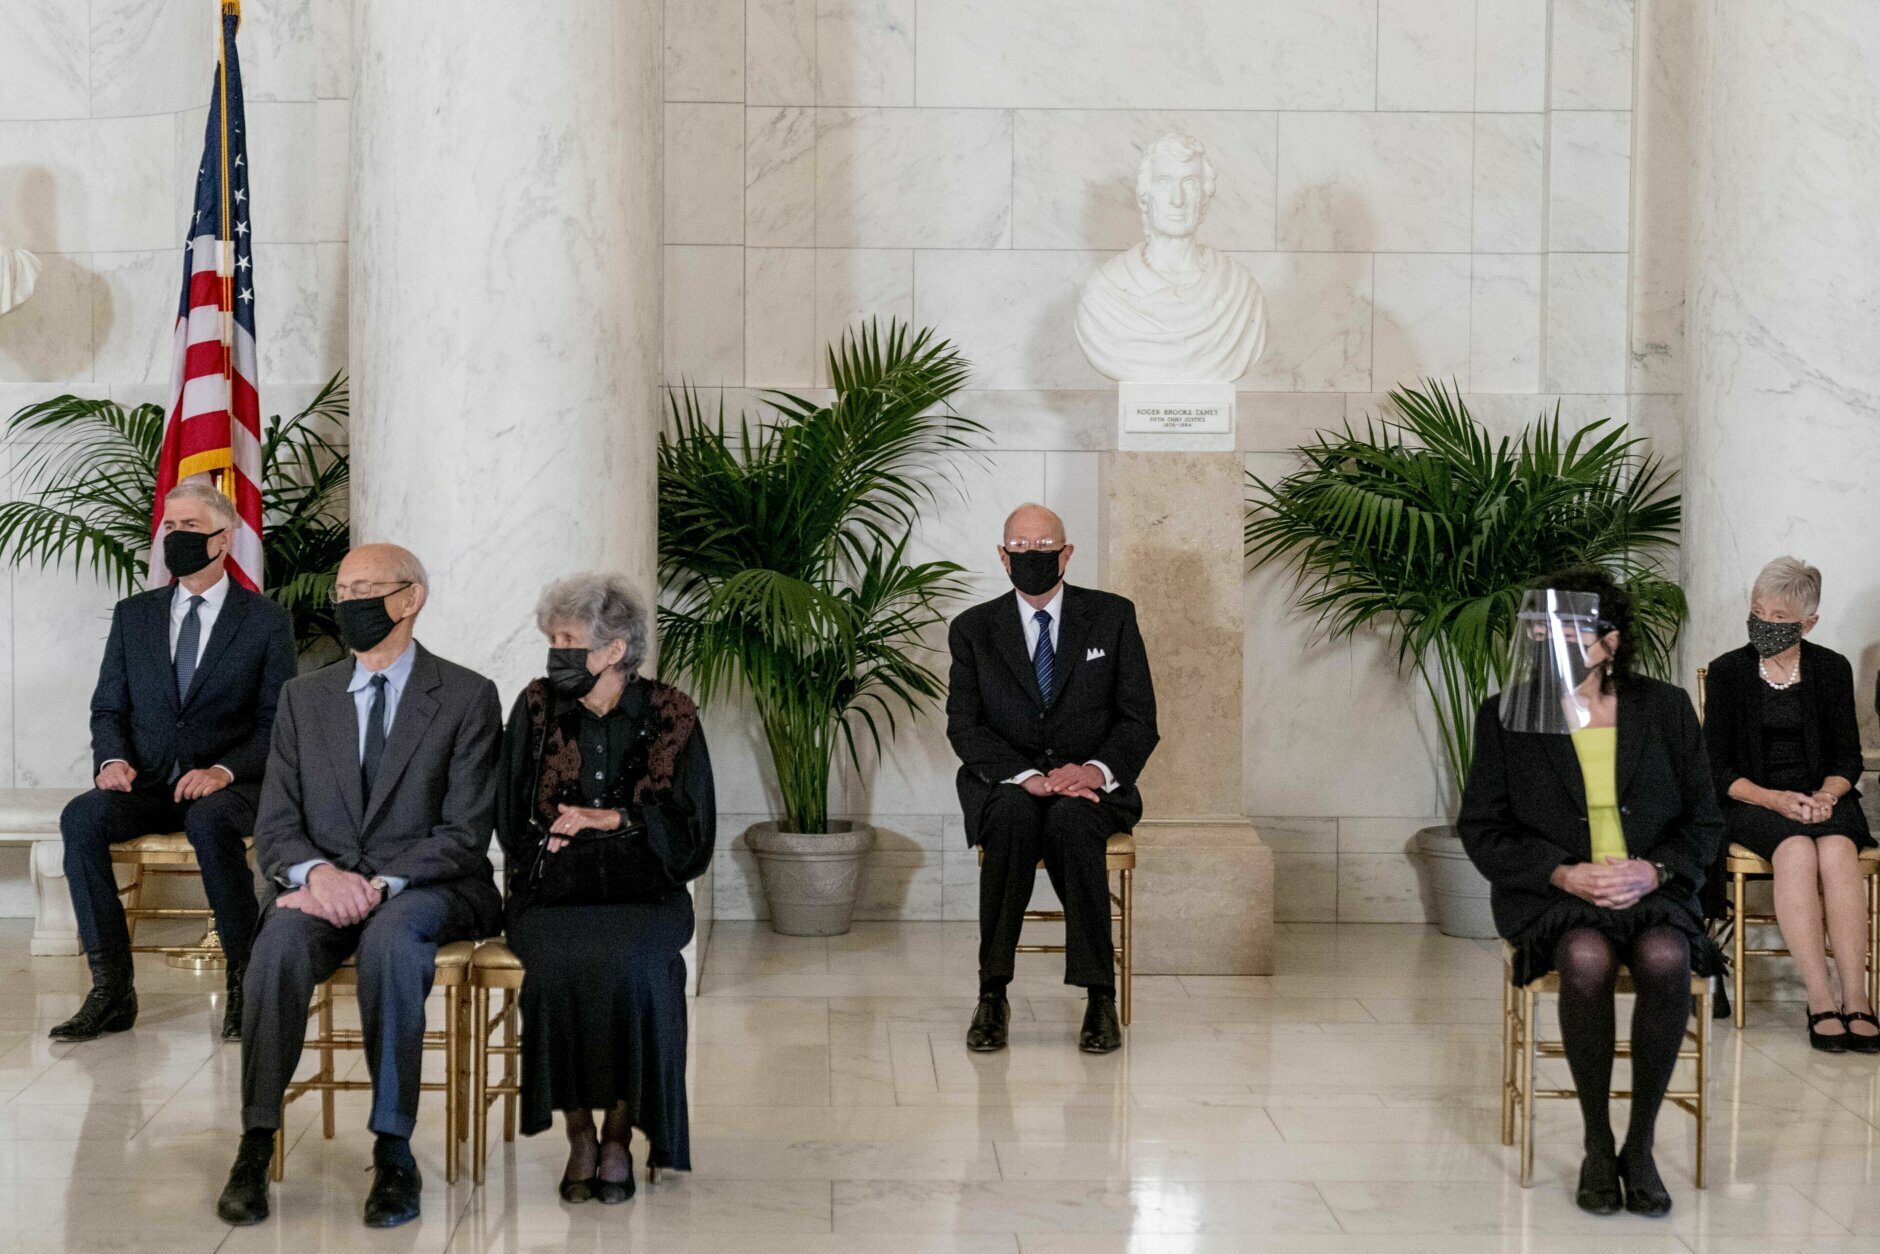 From left, Justice Neil Gorsuch, Justice Stephen Breyer and his wife Joanna, Retired Justice Anthony Kennedy, Justice Sonia Sotomayor, and Maureen Scalia, the wife of the late Justice Antonin Scalia, attend a private ceremony for Justice Ruth Bader Ginsburg at the Supreme Court in Washington, Wednesday, Sept. 23, 2020. Ginsburg, 87, died of cancer on Sept. 18. (AP Photo/Andrew Harnik, Pool)